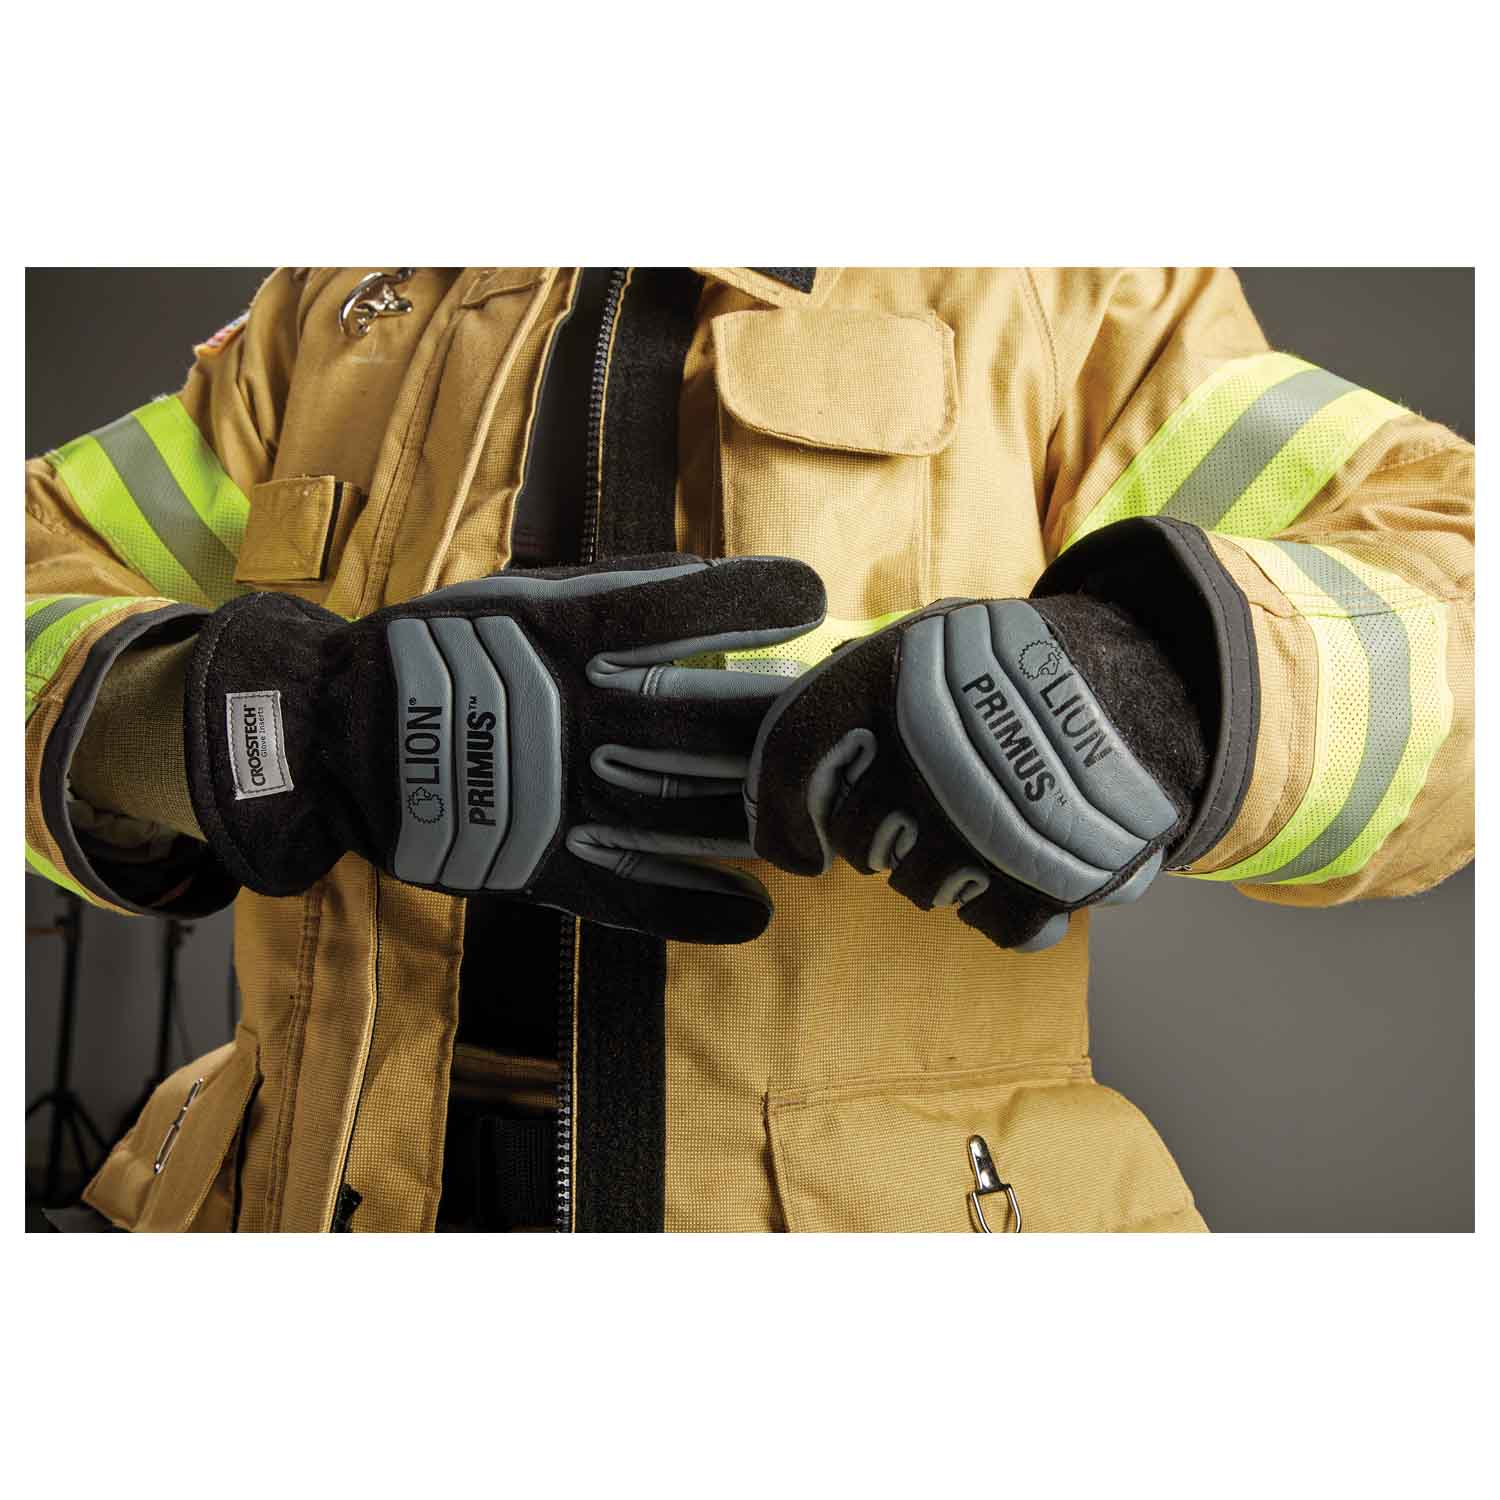 LION Primus NFPA Advanced Structural Firefighting Gloves